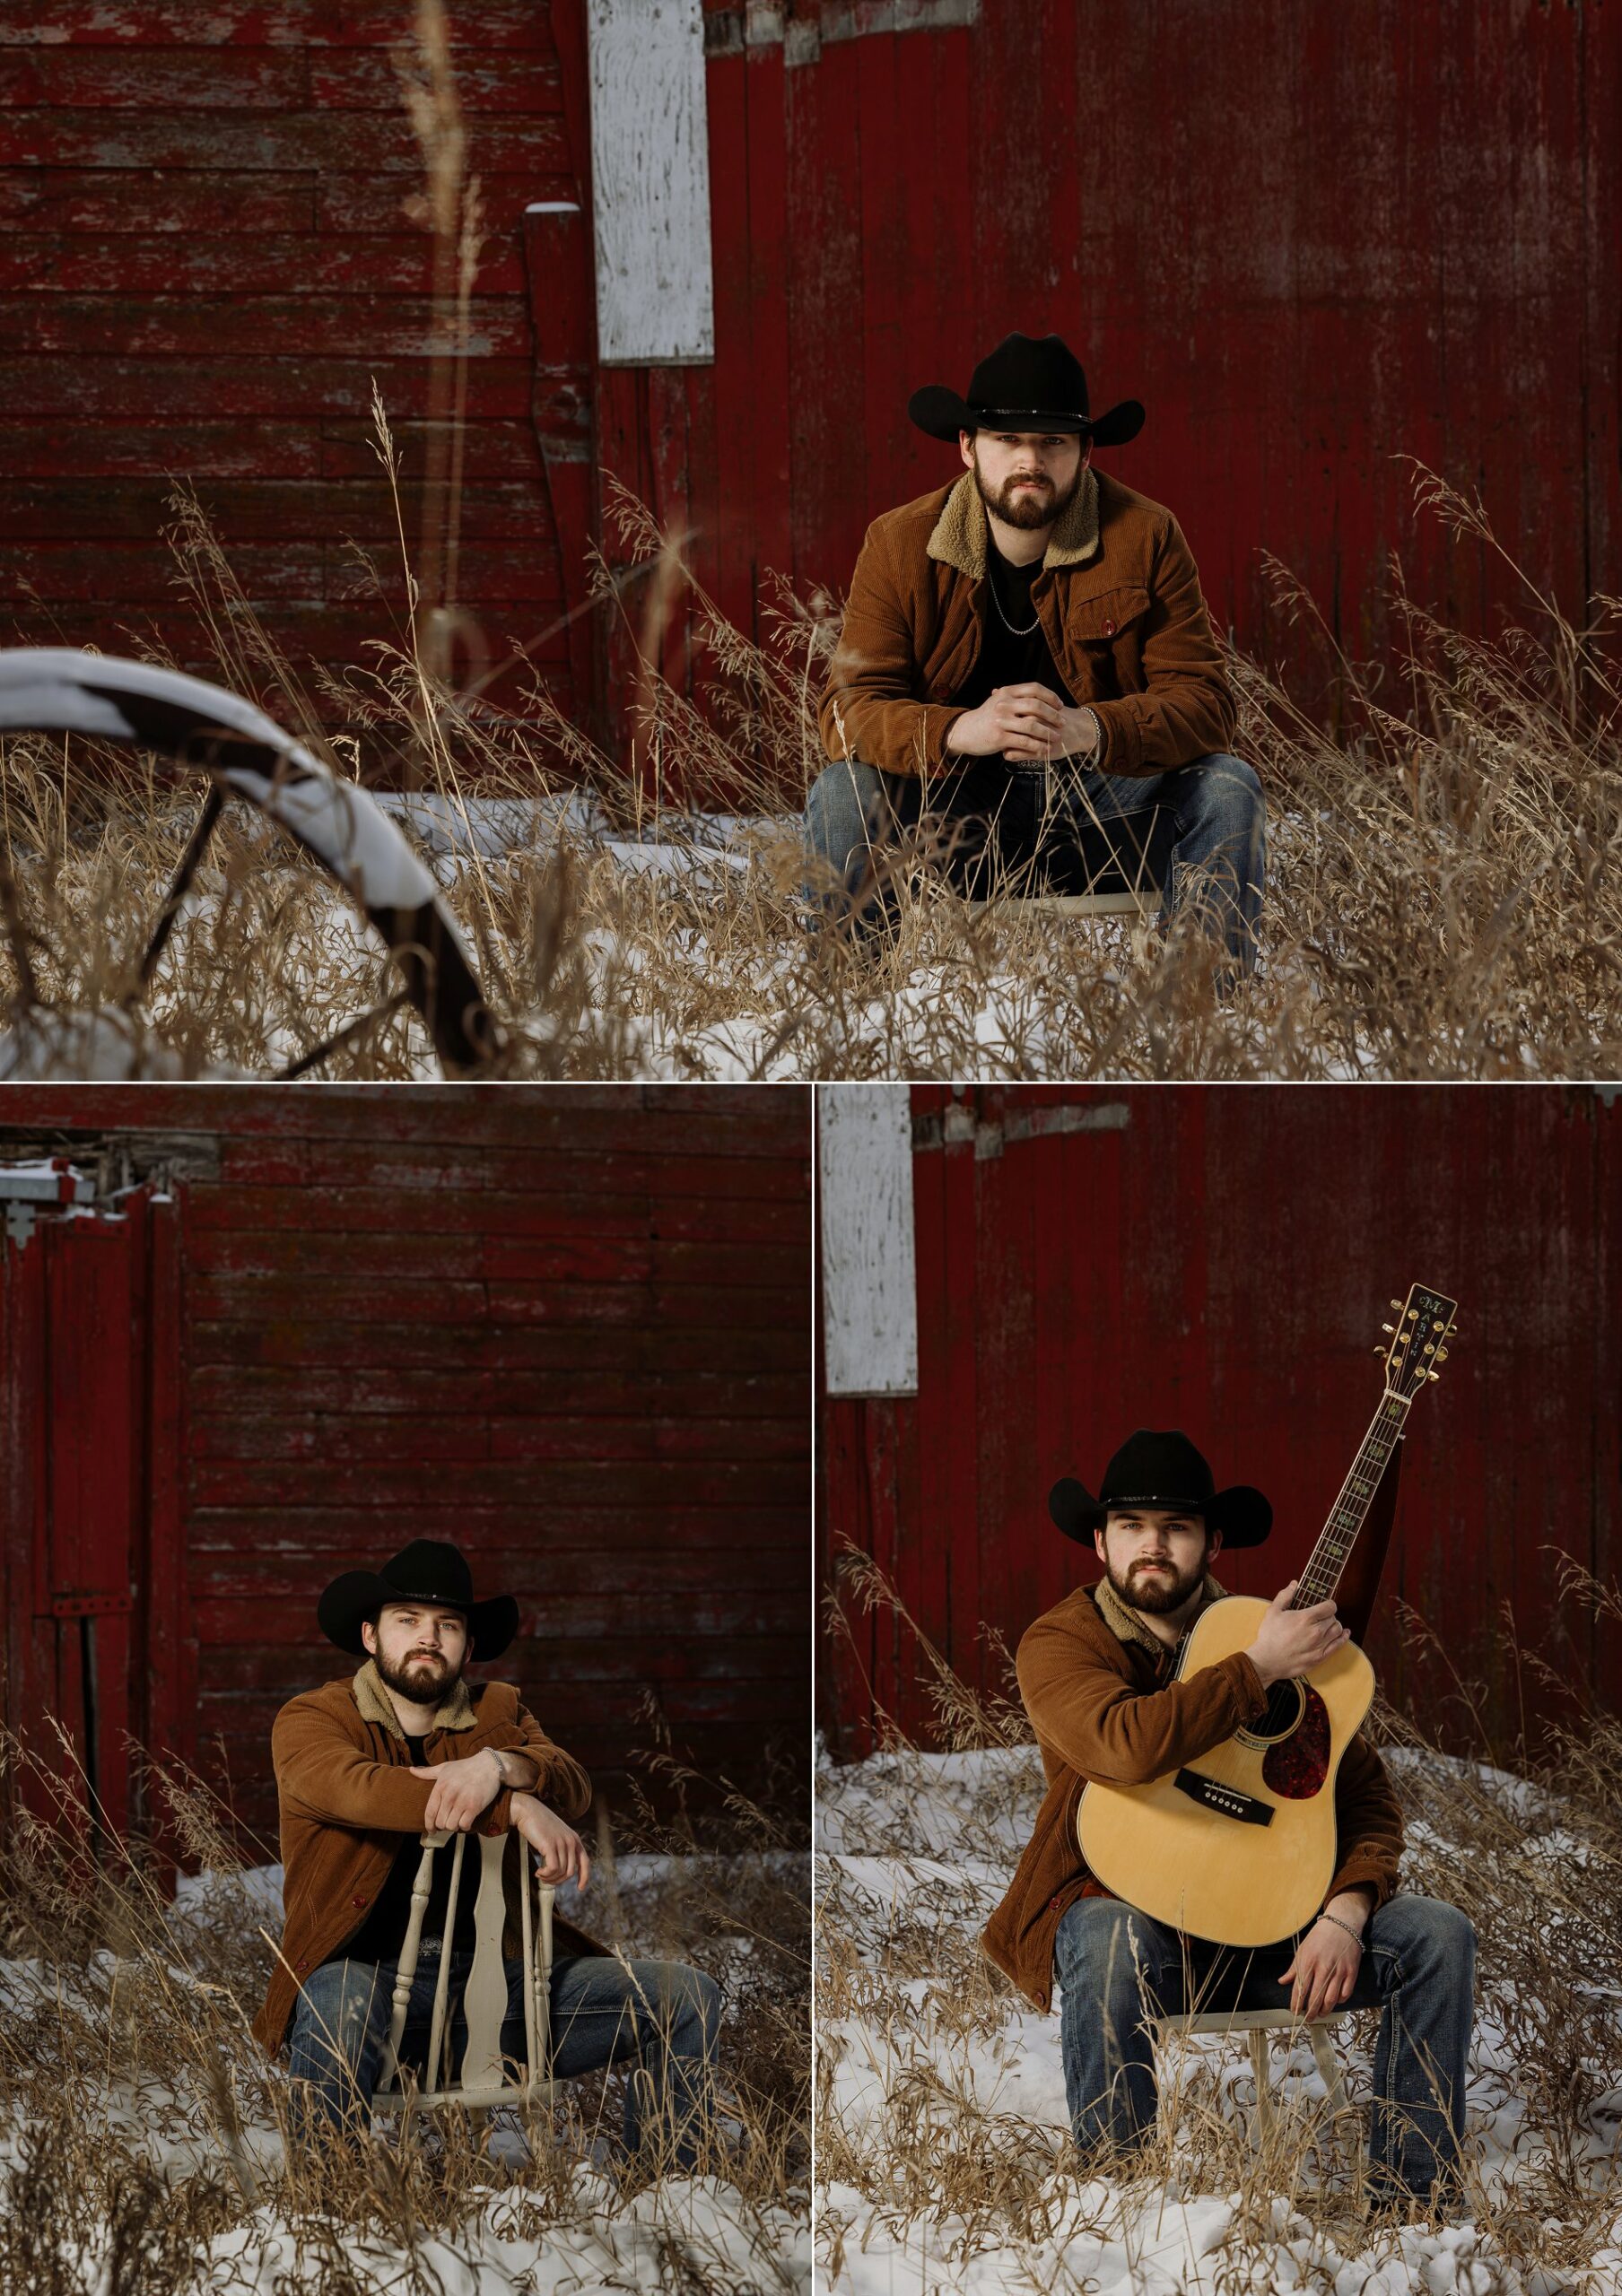 Saskatoon musician press photos for country music singer Josh Stumpf, who sits in front of a red barn surrounded by grass, holding a guitar.